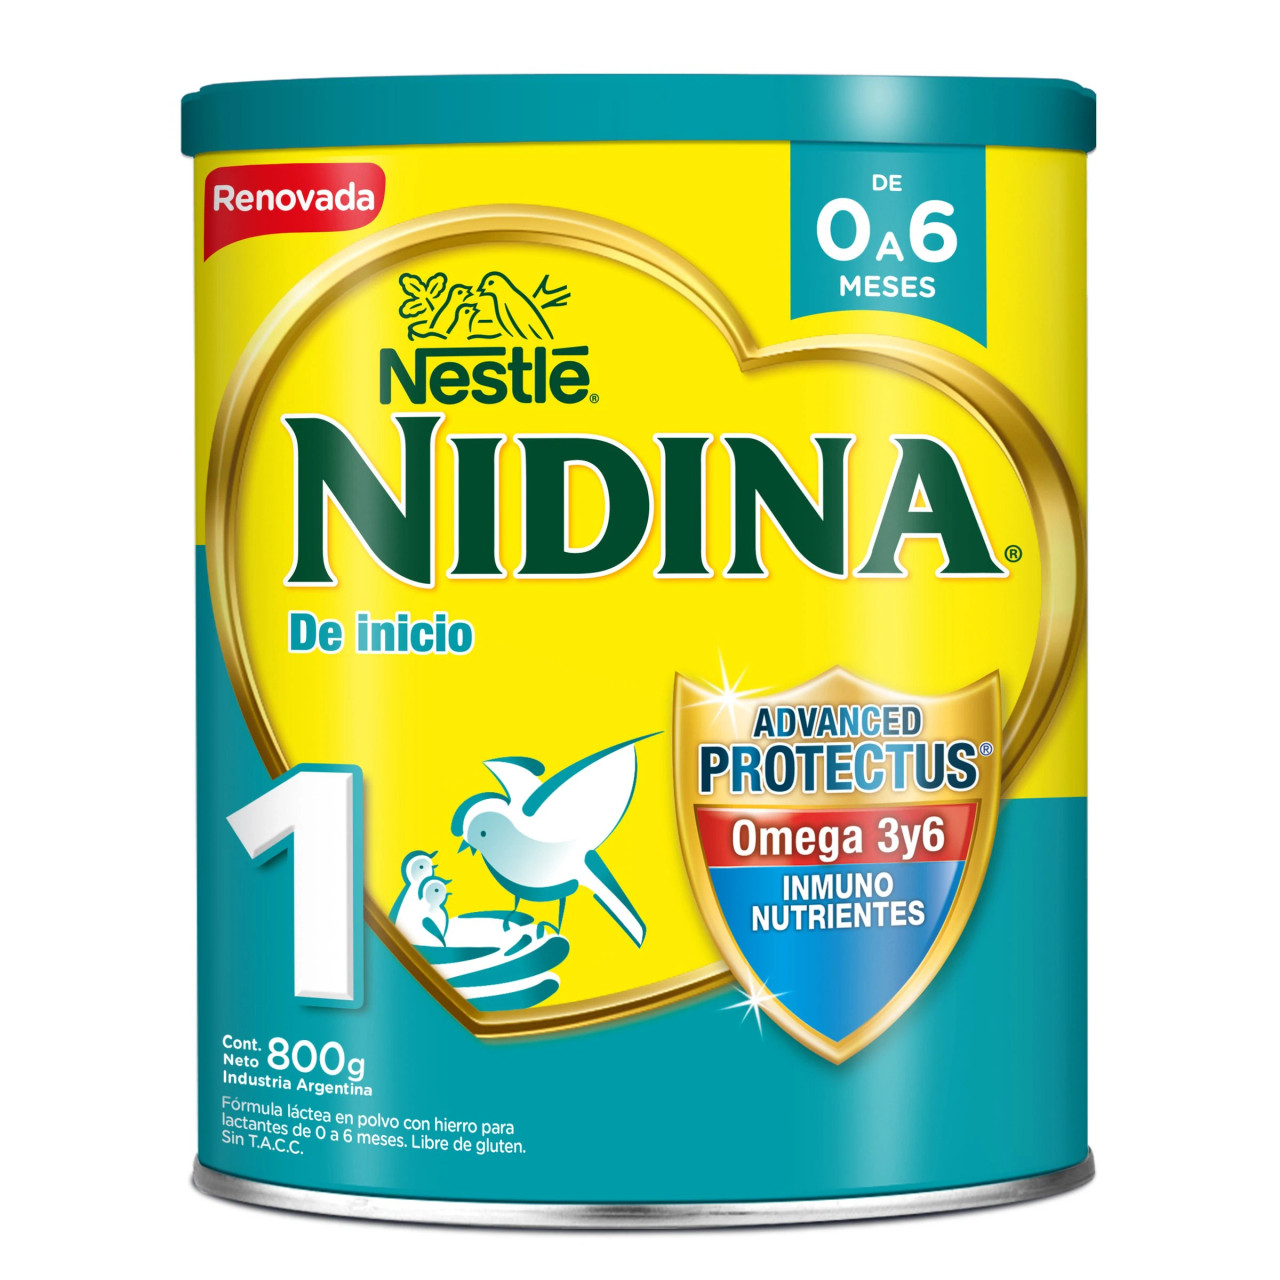 Nestlé Nidina Milk Powder Specially Formulated Fortified with Omega 3 and  6, Immune Nutrients Easy to